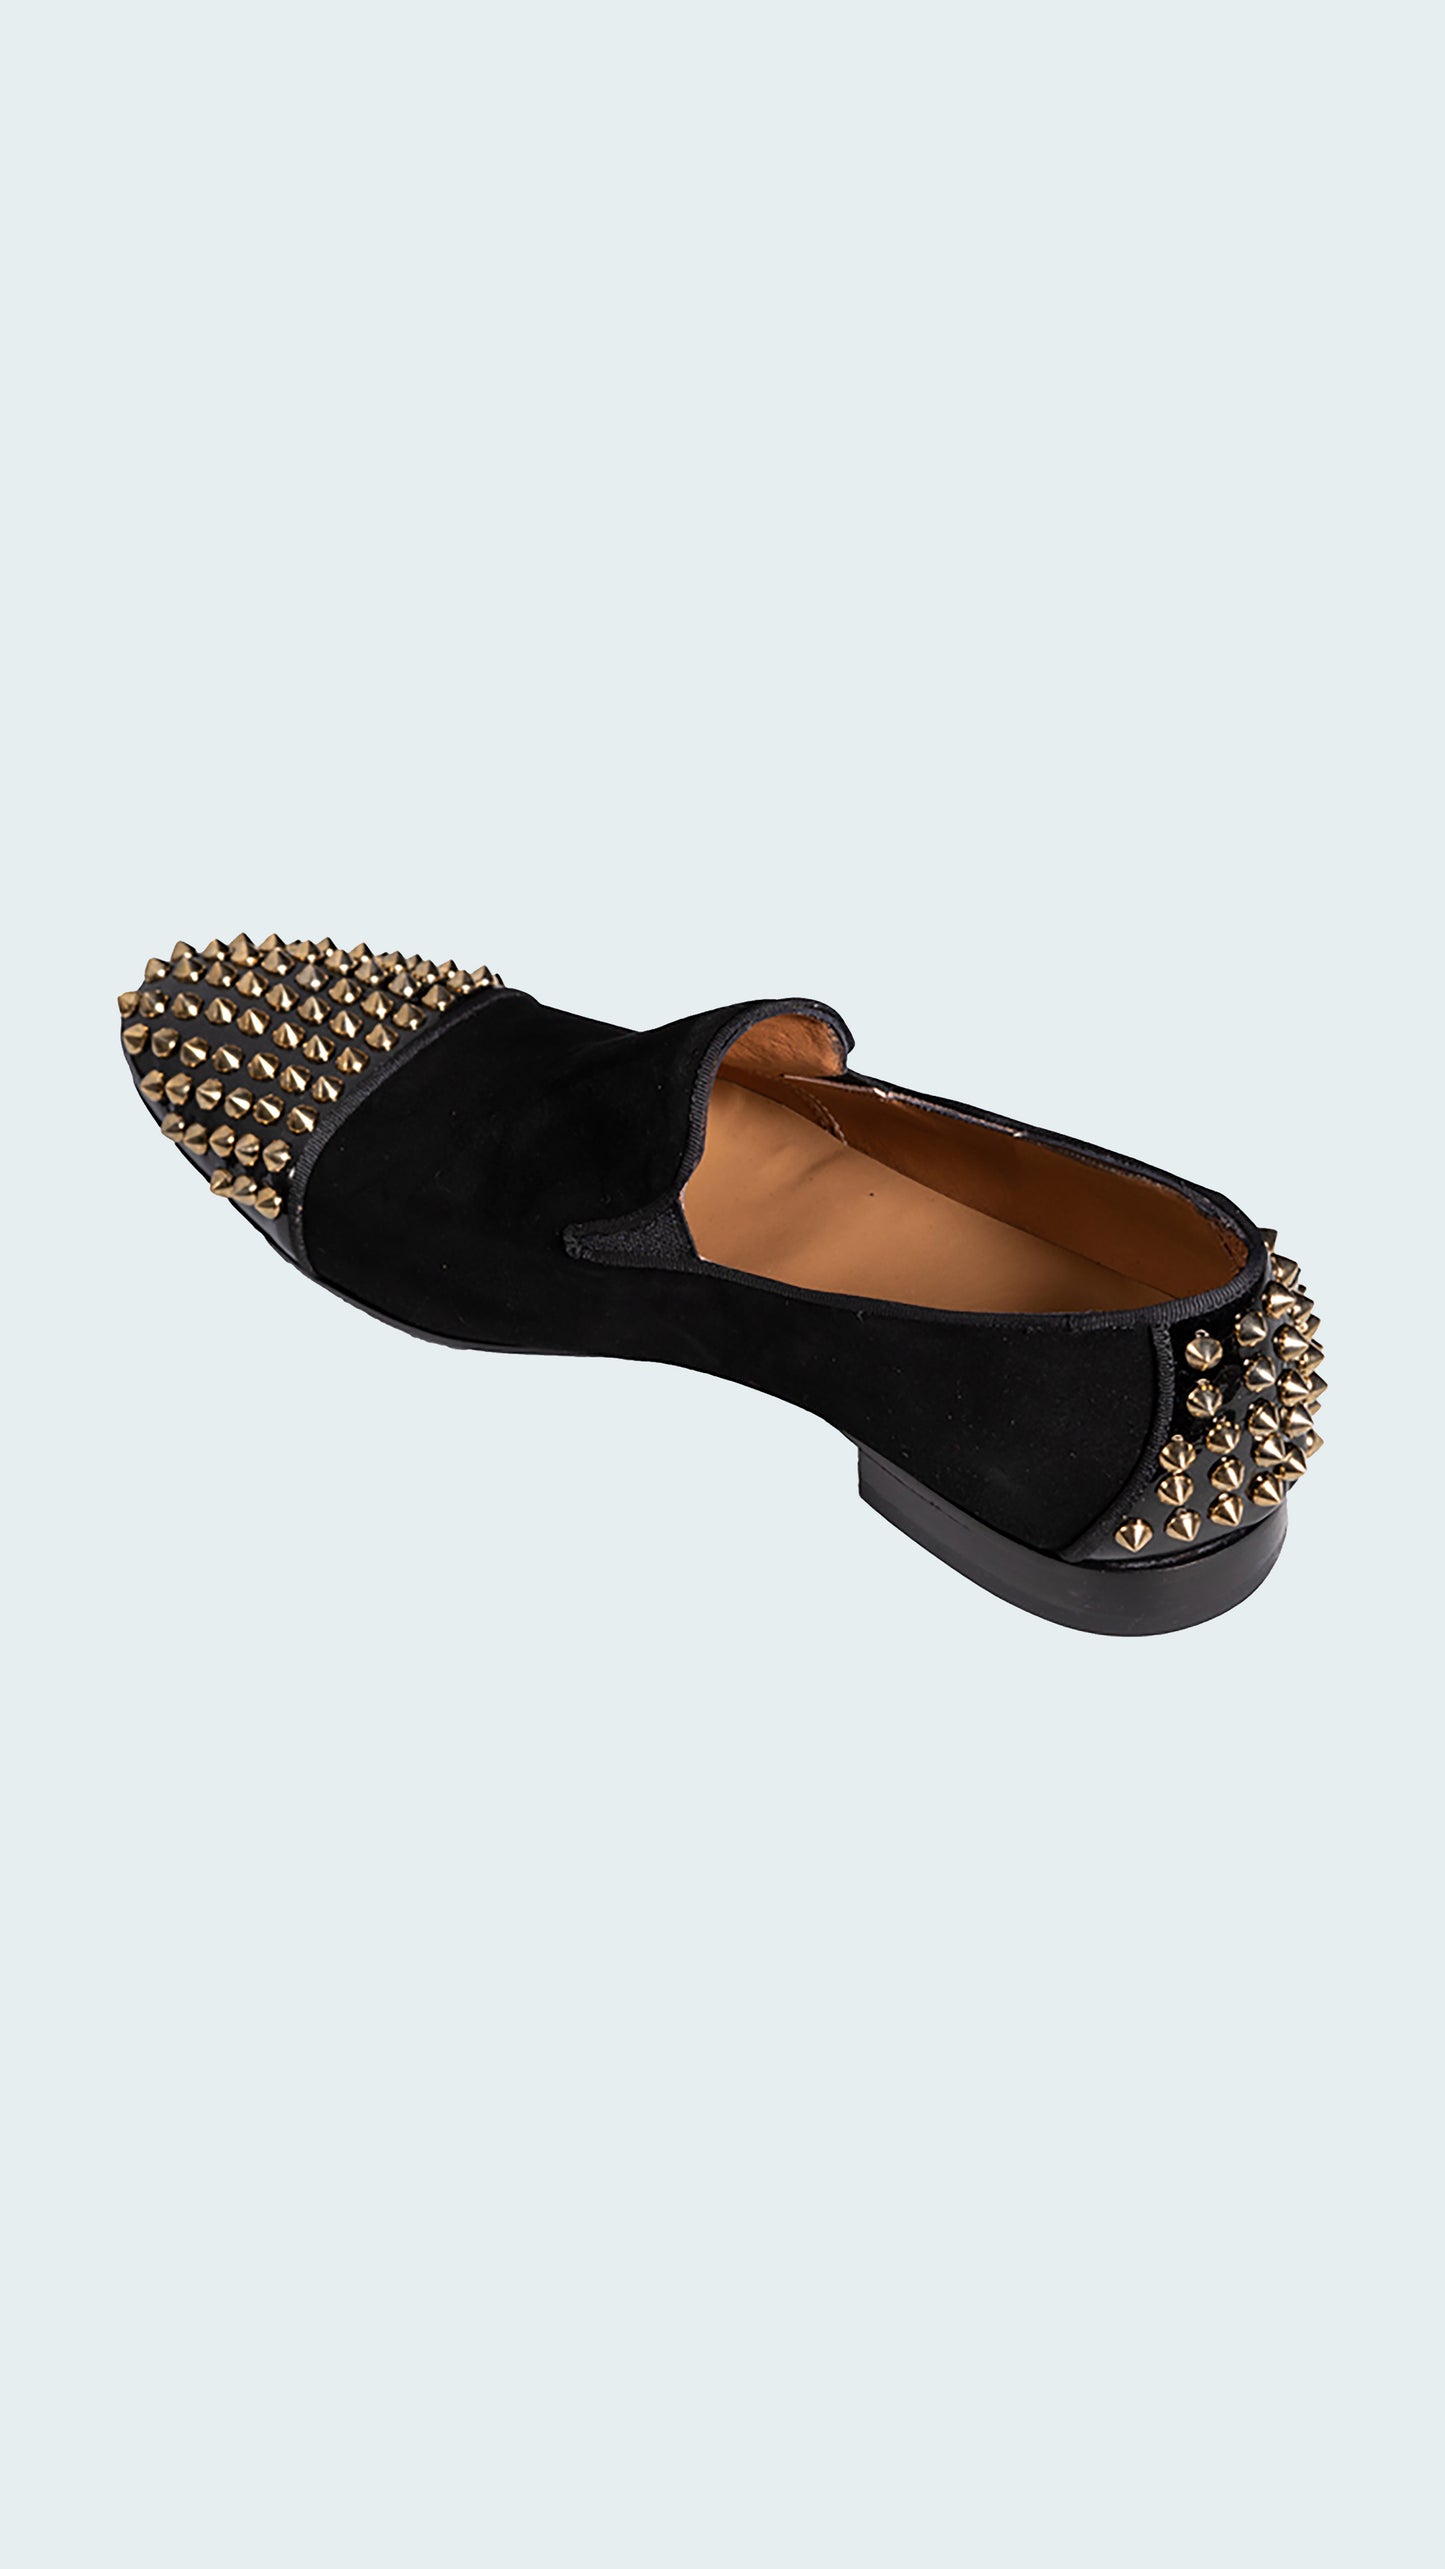 Men's Black Suede Loafers with Bold Gold Spiked Embellishments by Vercini